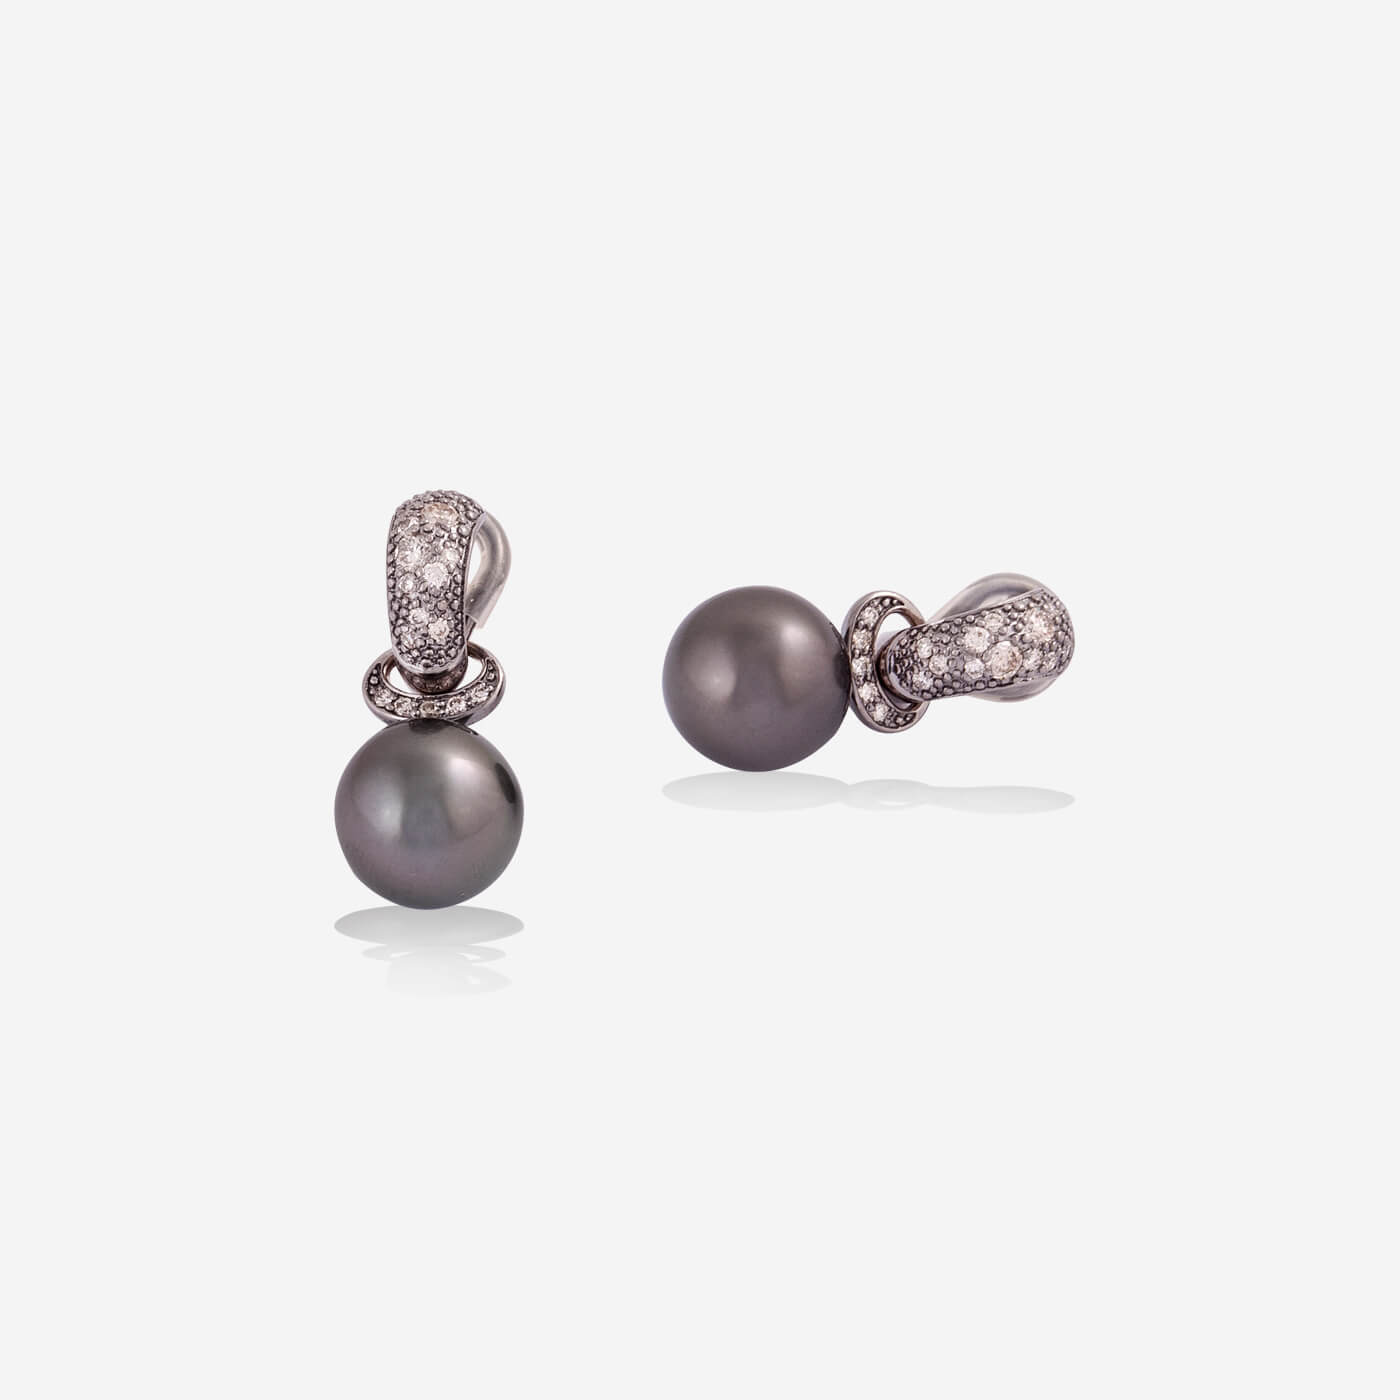 Multifunctional White Gold Grey Pearl With Diamonds Earrings - Ref: RK02507